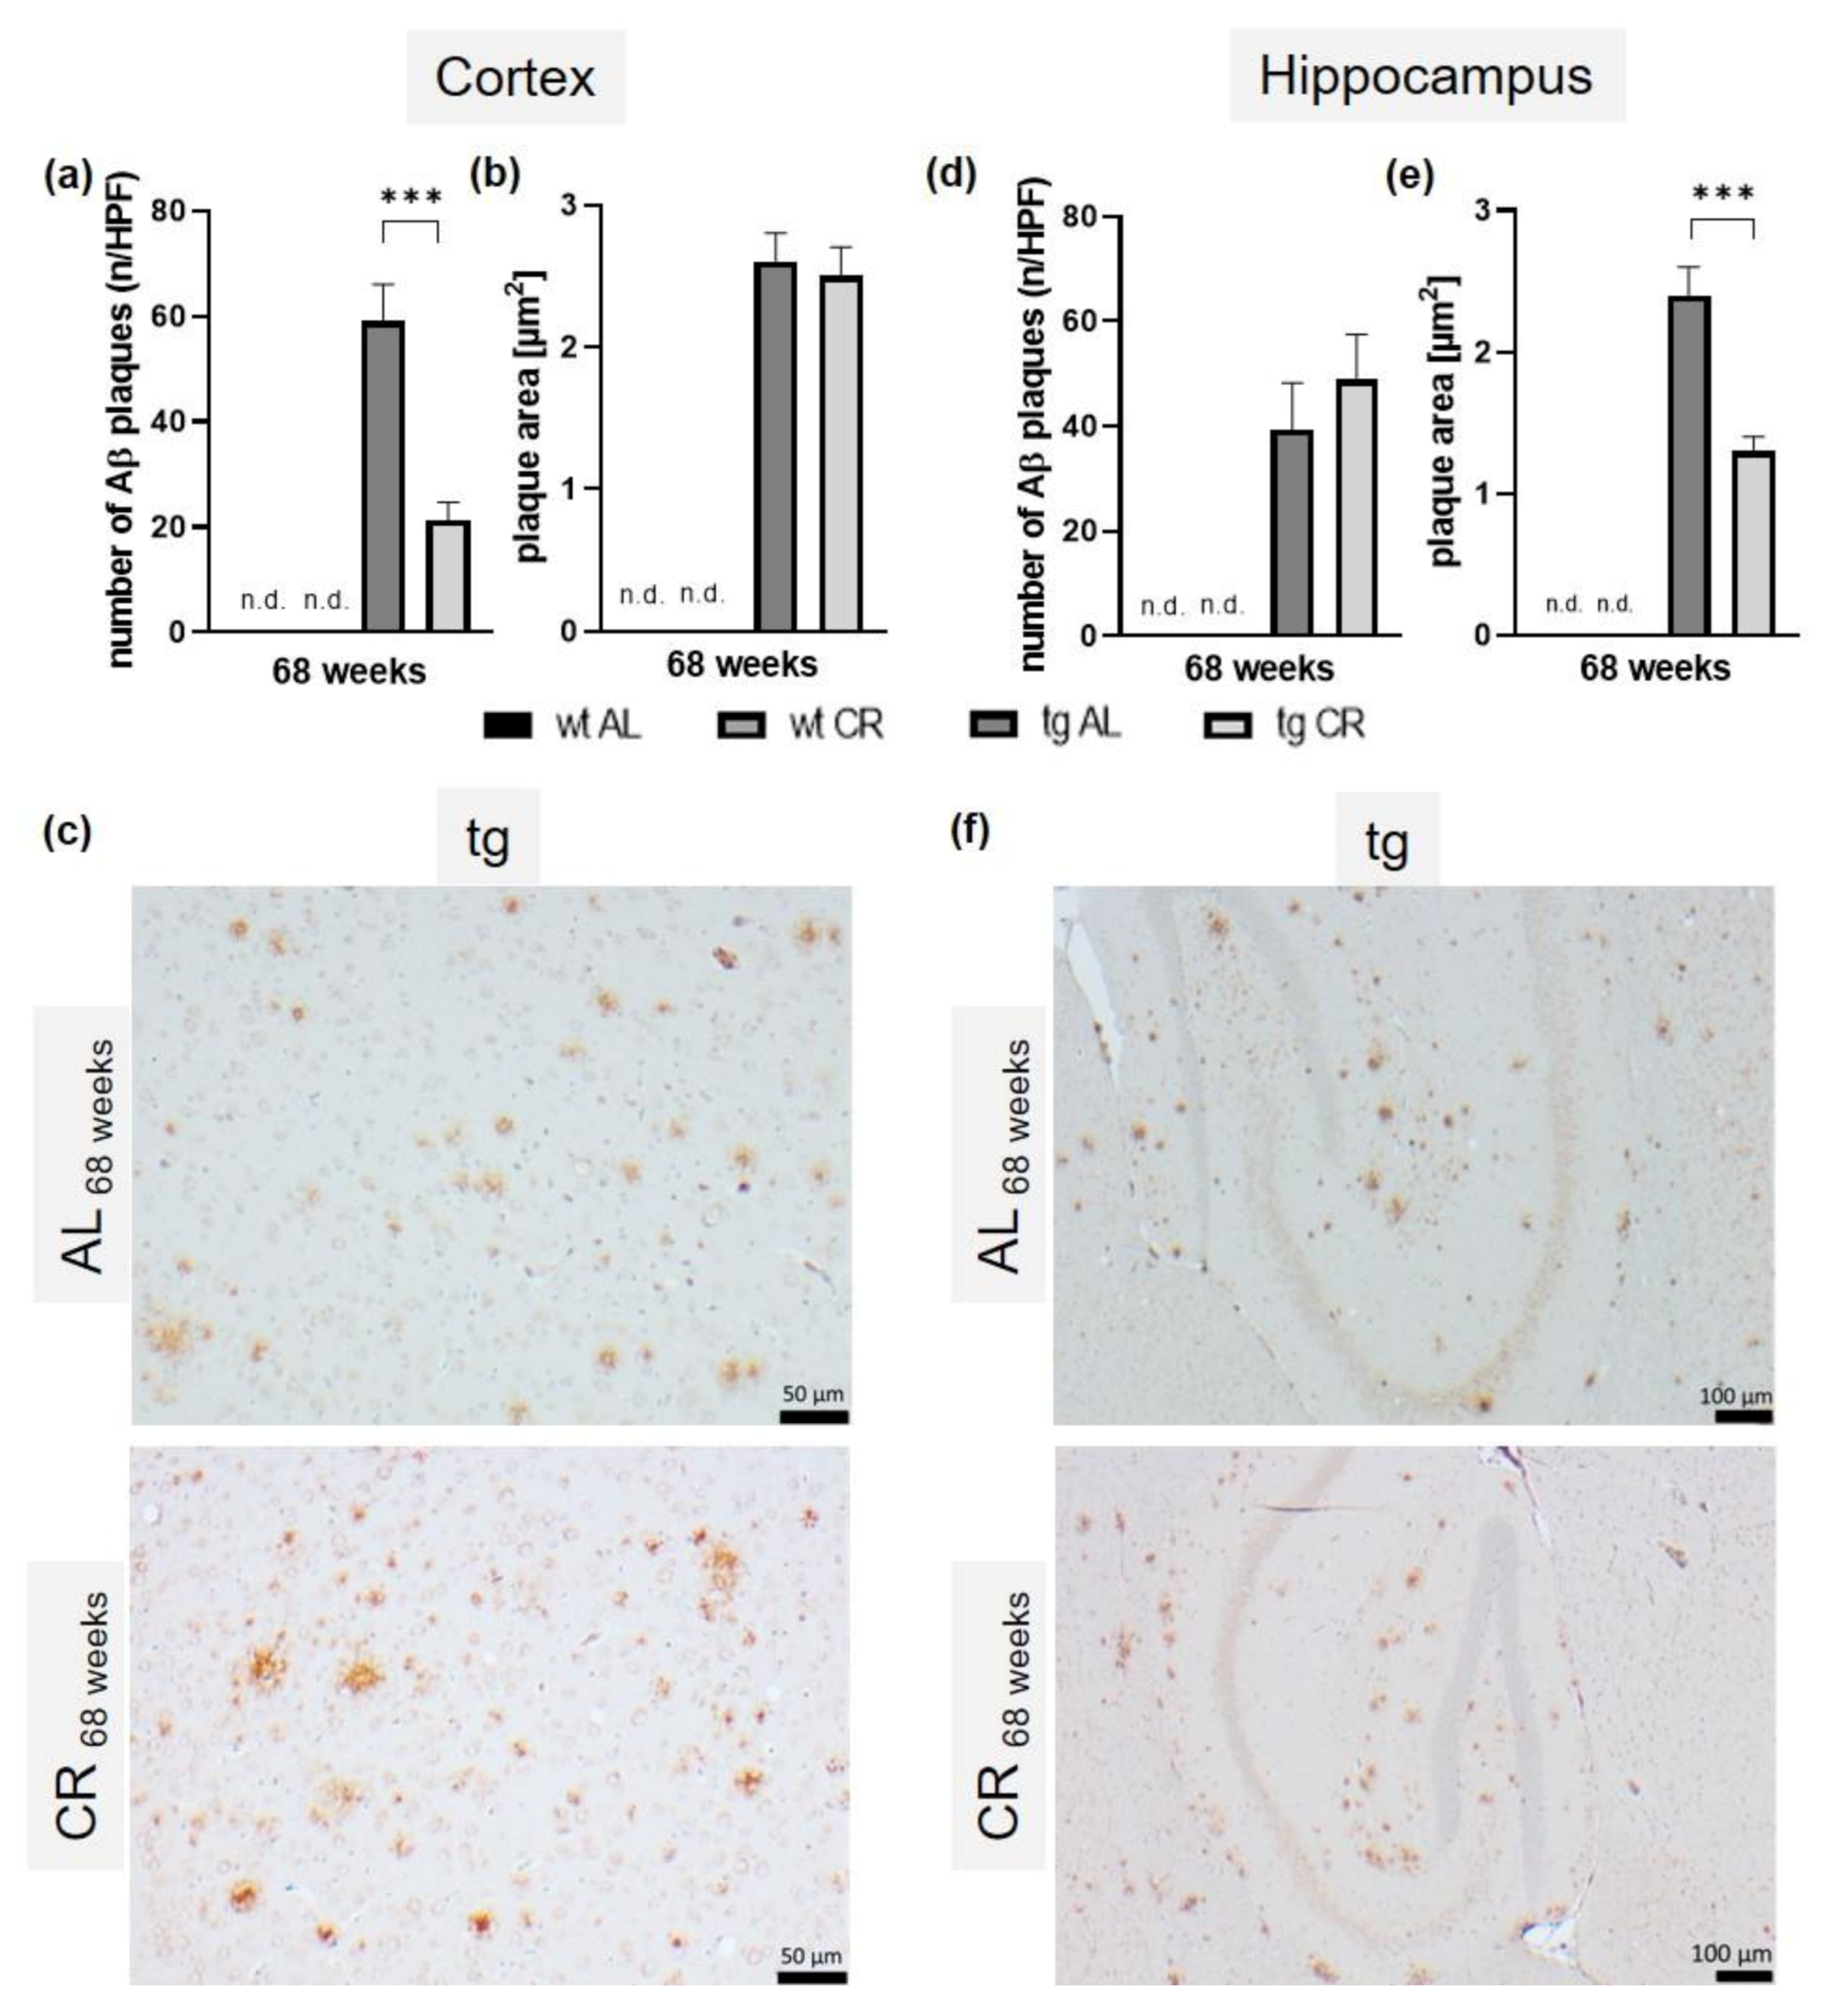 Nutrients Free Full Text Long Term Caloric Restriction Attenuates B Amyloid Neuropathology And Is Accompanied By Autophagy In Appswe Ps1delta9 Mice Html